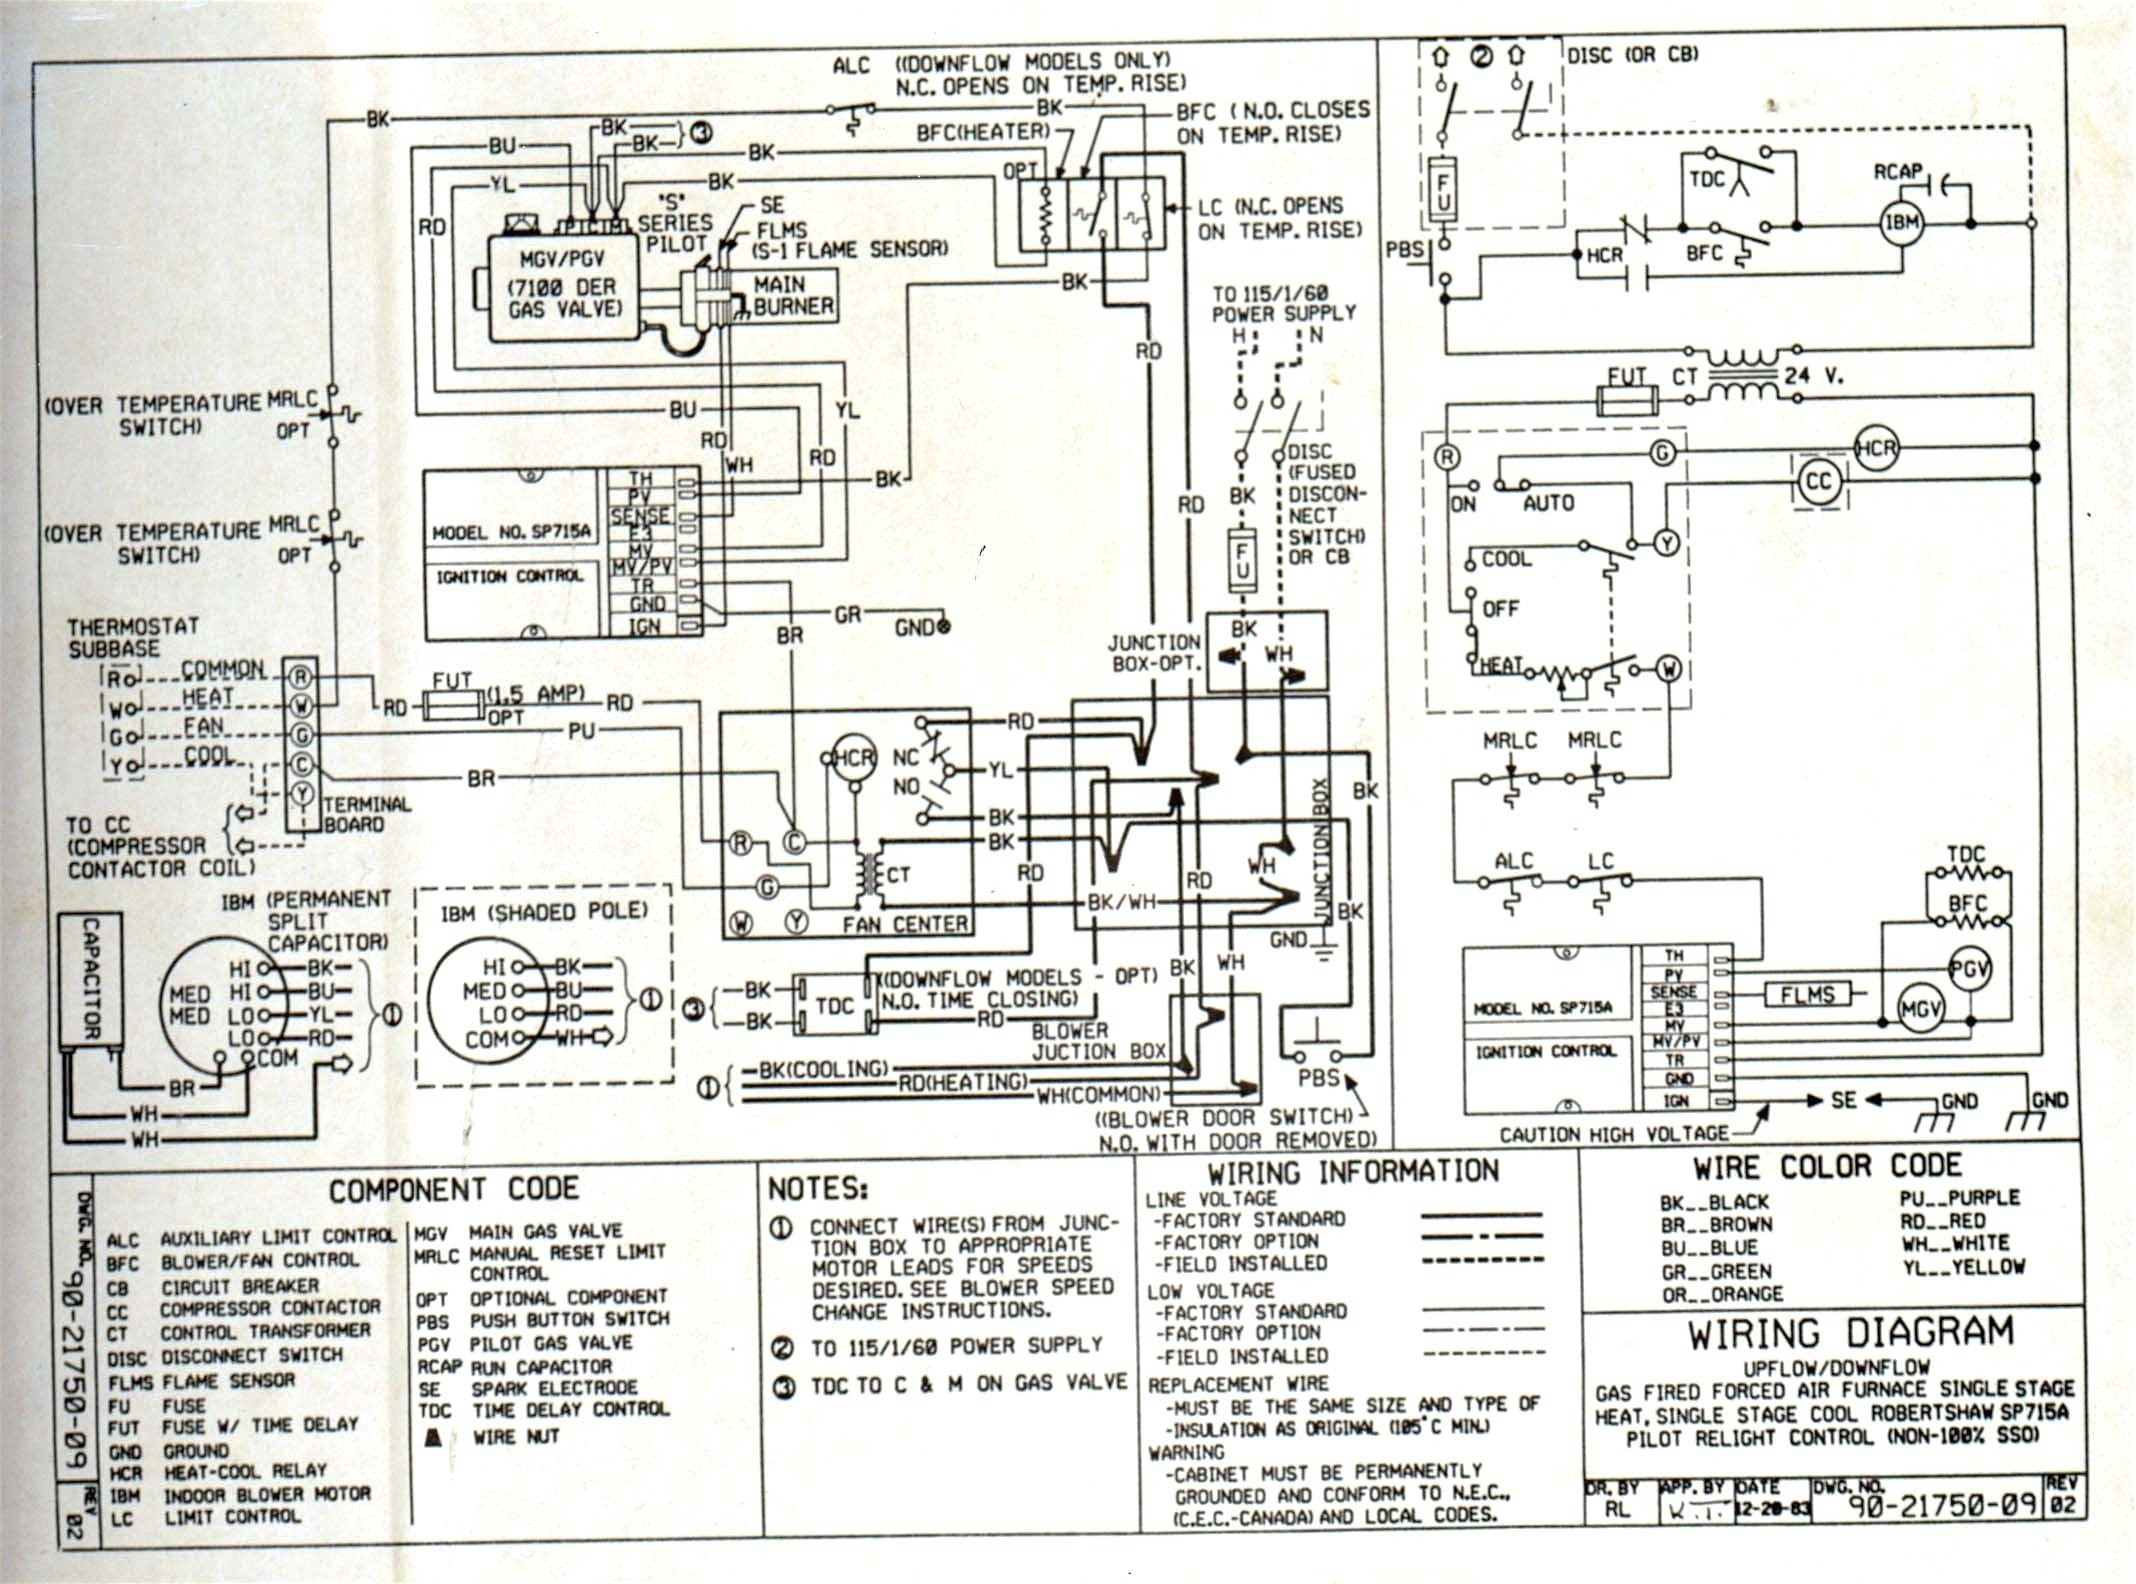 Air Conditioning Wiring Diagram Awesome Wiring Diagram Air Conditioning Pressor Fresh Wiring Diagram Ac Best